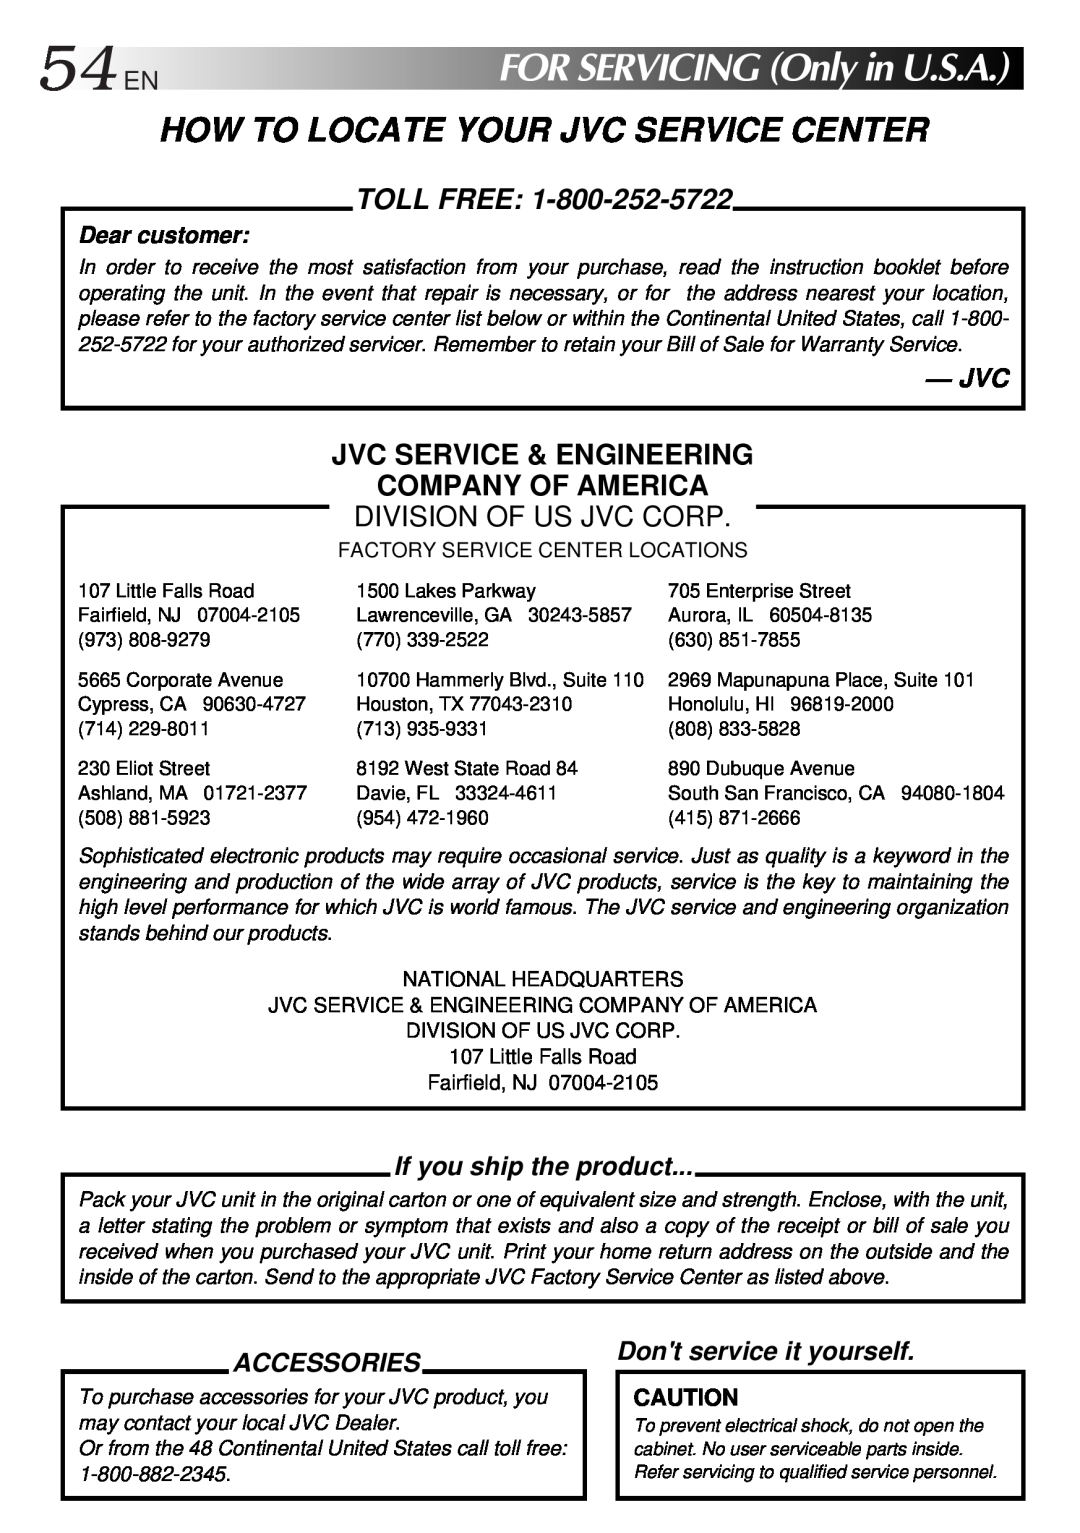 JVC GR-AXM100 manual 54ENFORSERVICINGOnlyinU.S.A, How To Locate Your Jvc Service Center, Toll Free, Division Of Us Jvc Corp 